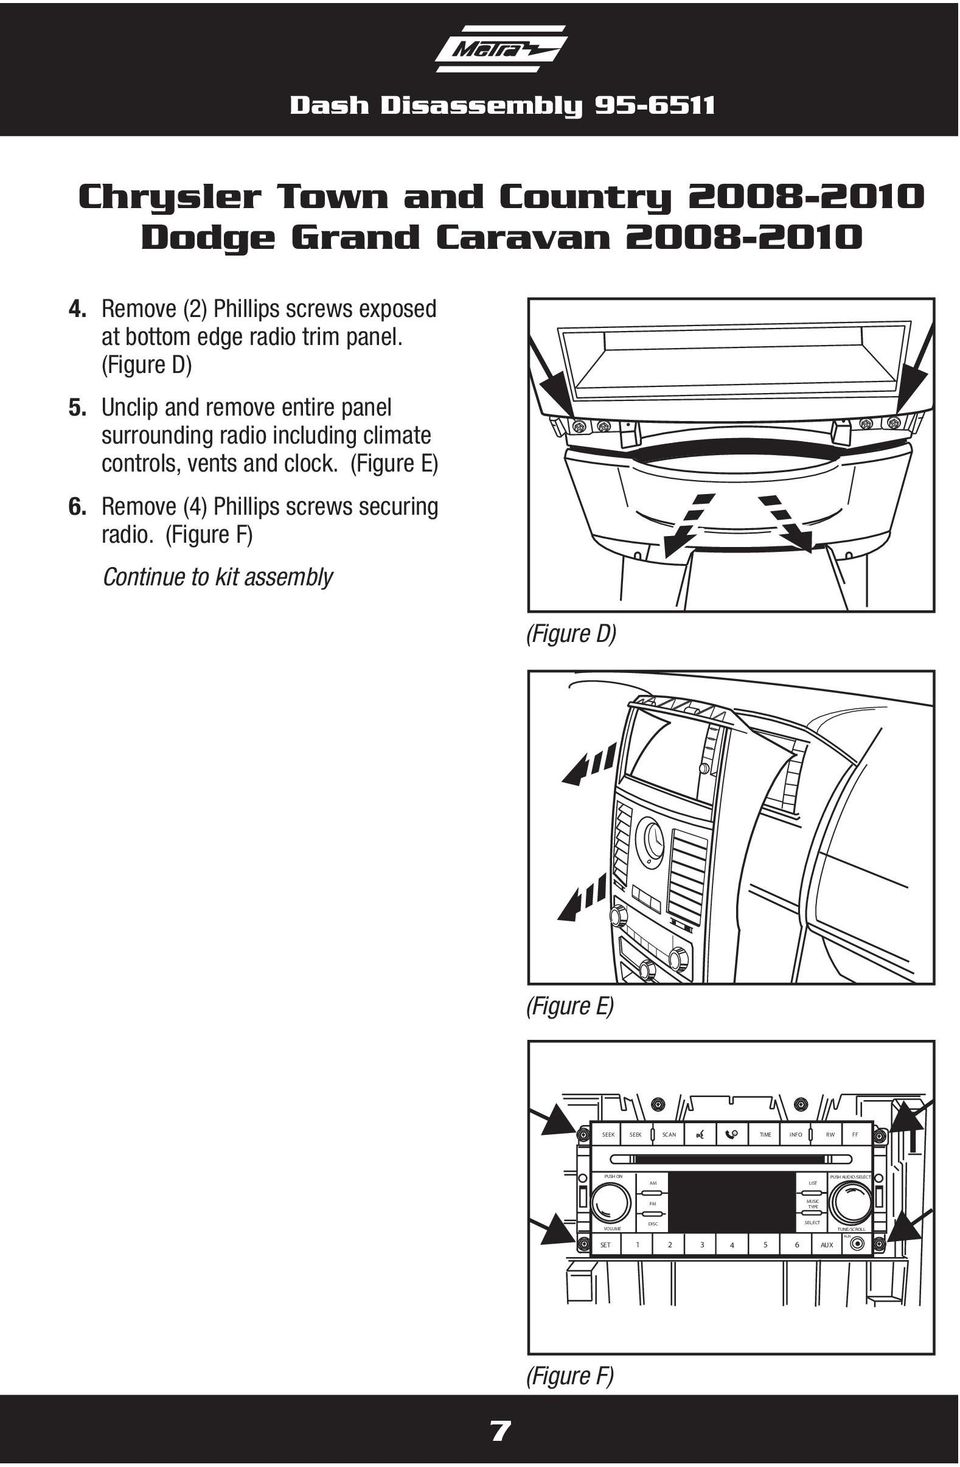 Unclip and remove entire panel surrounding radio including climate controls, vents and clock. (Figure E) 6.